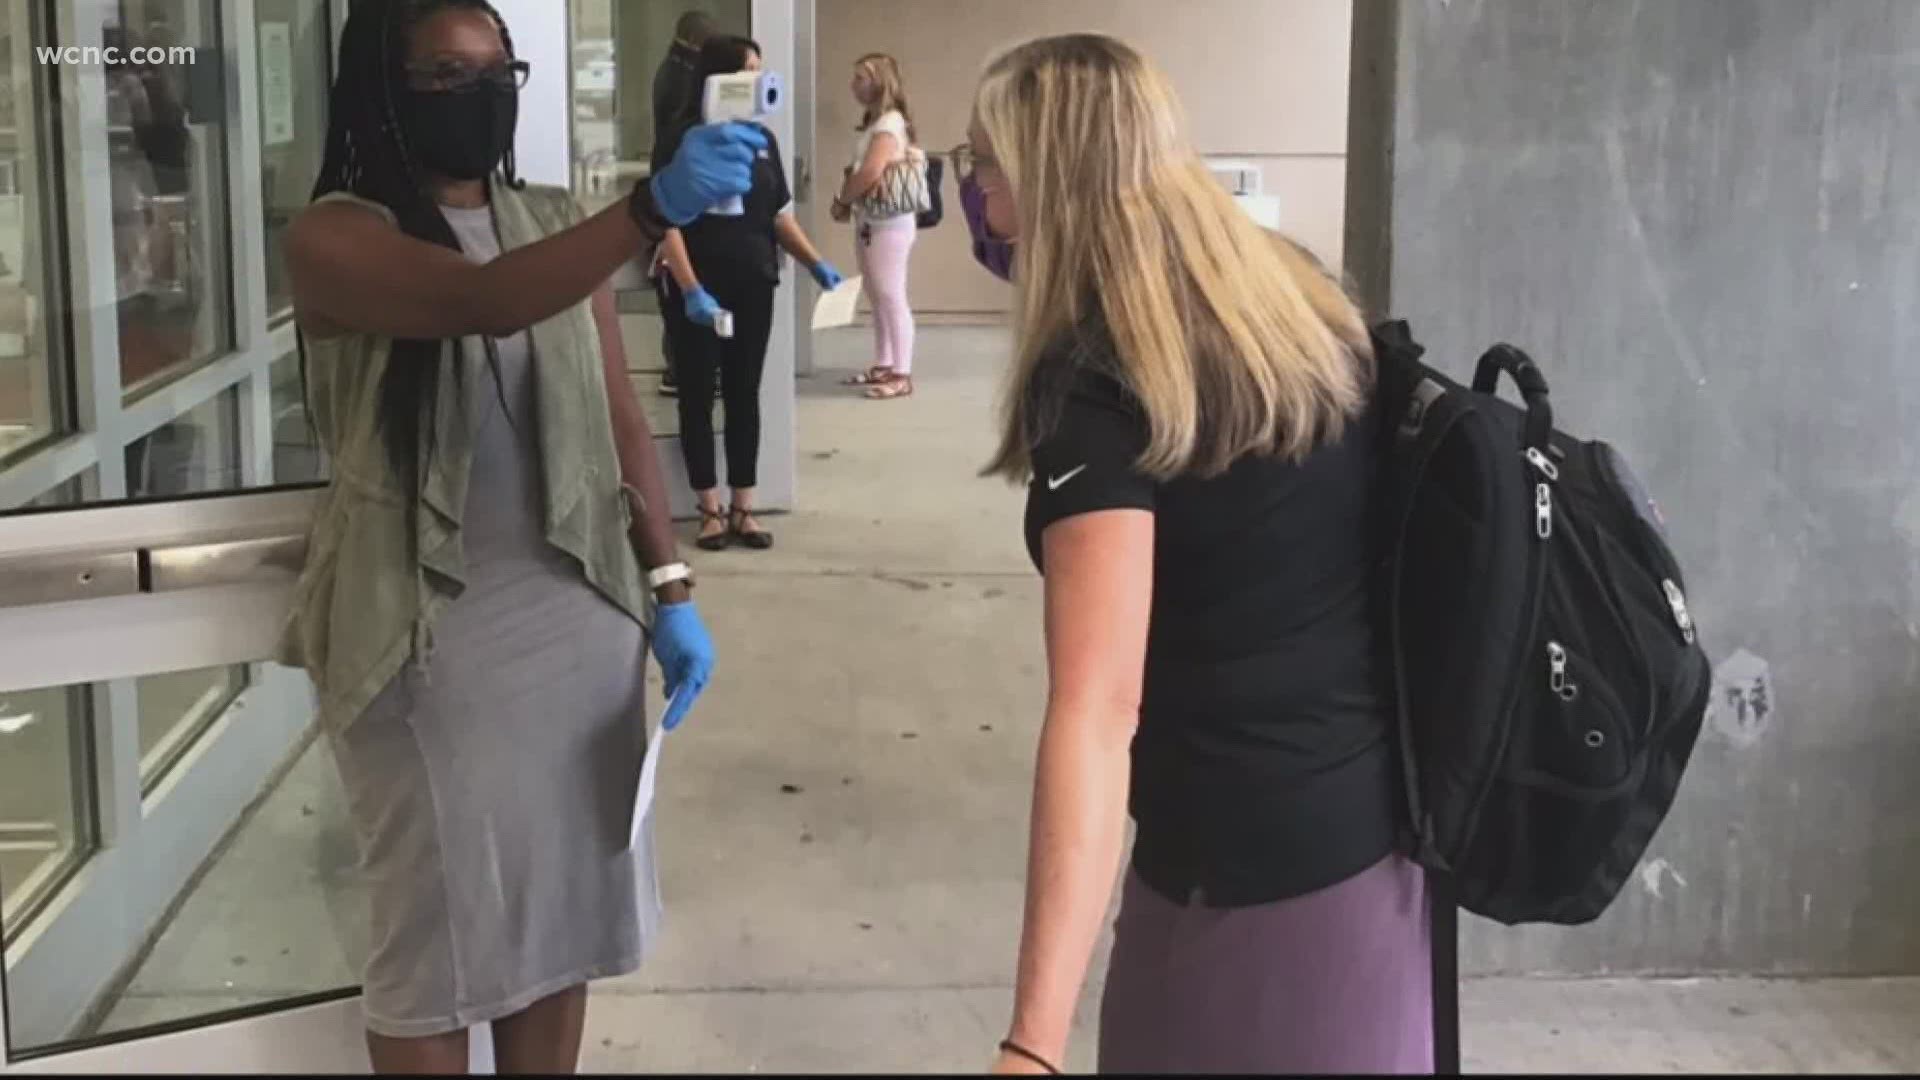 Teachers went back to school this week to prepare for the upcoming year. And while the timing is normal, the new school year is anything but usual in Charlotte.